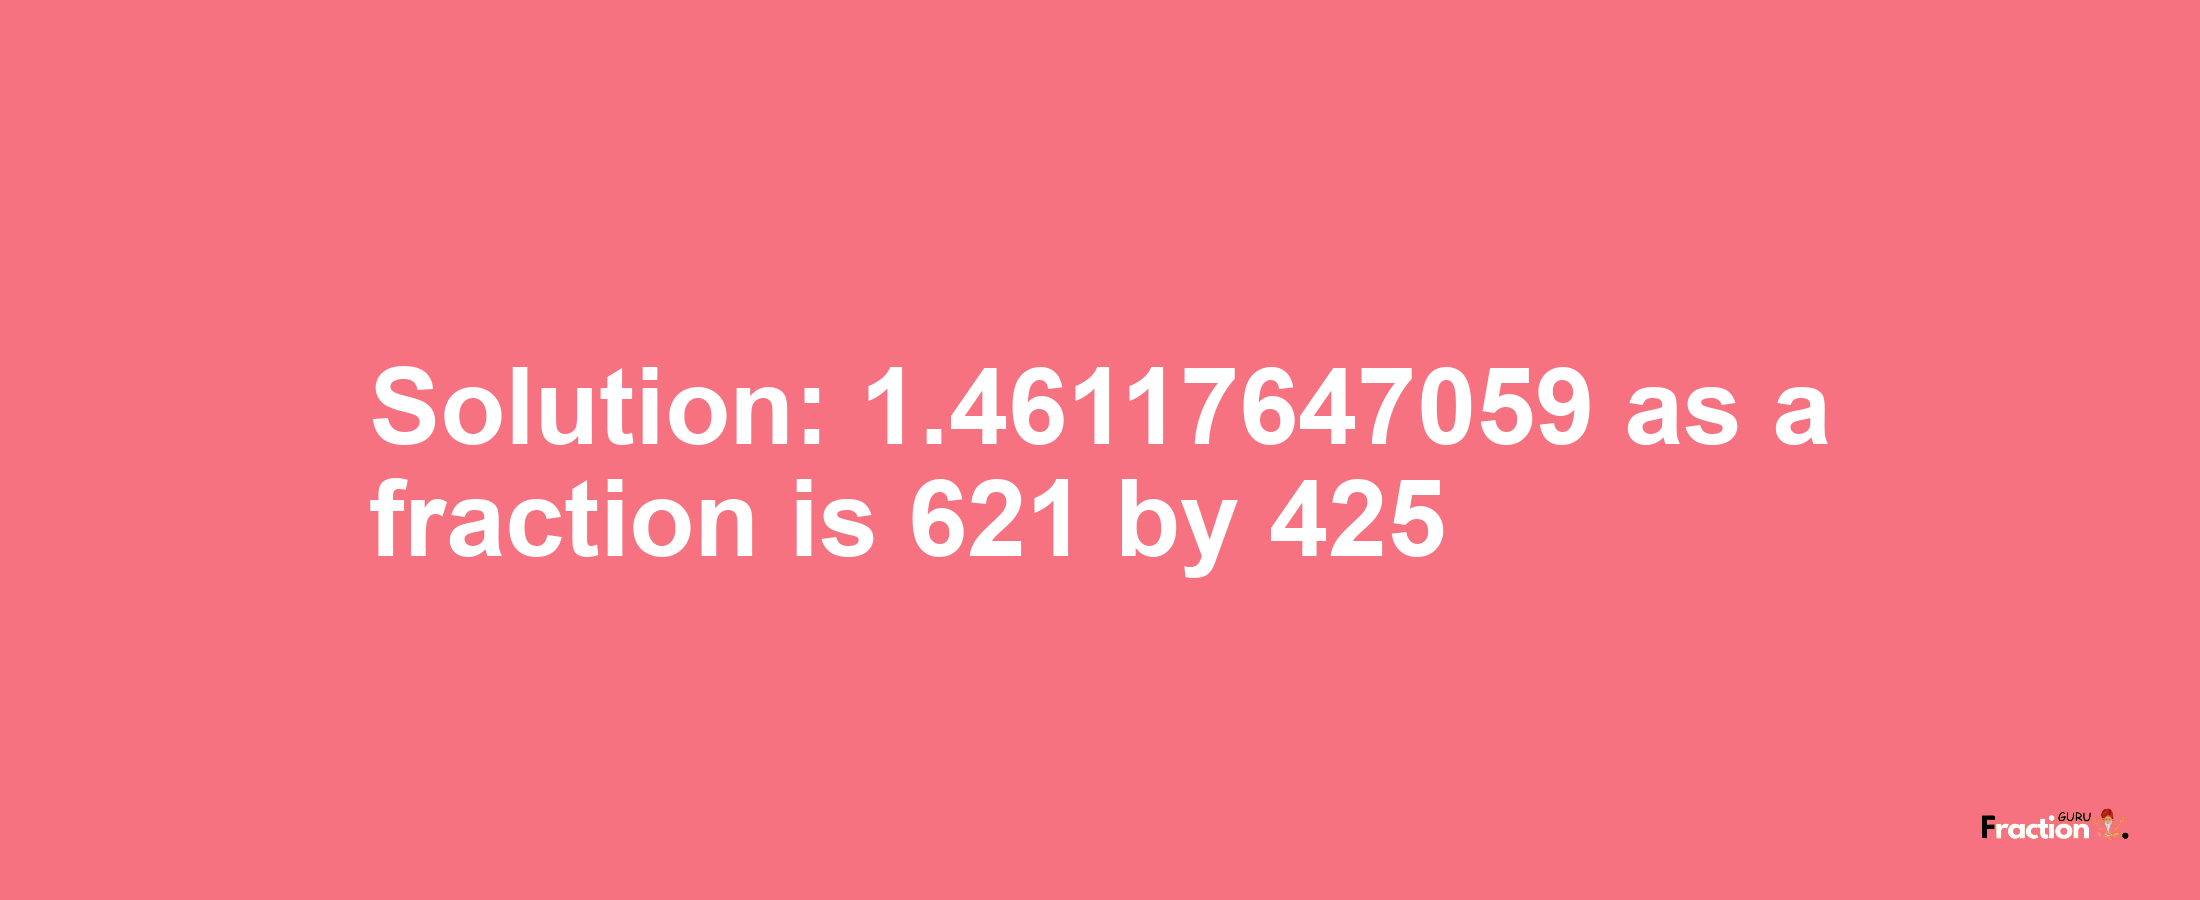 Solution:1.46117647059 as a fraction is 621/425